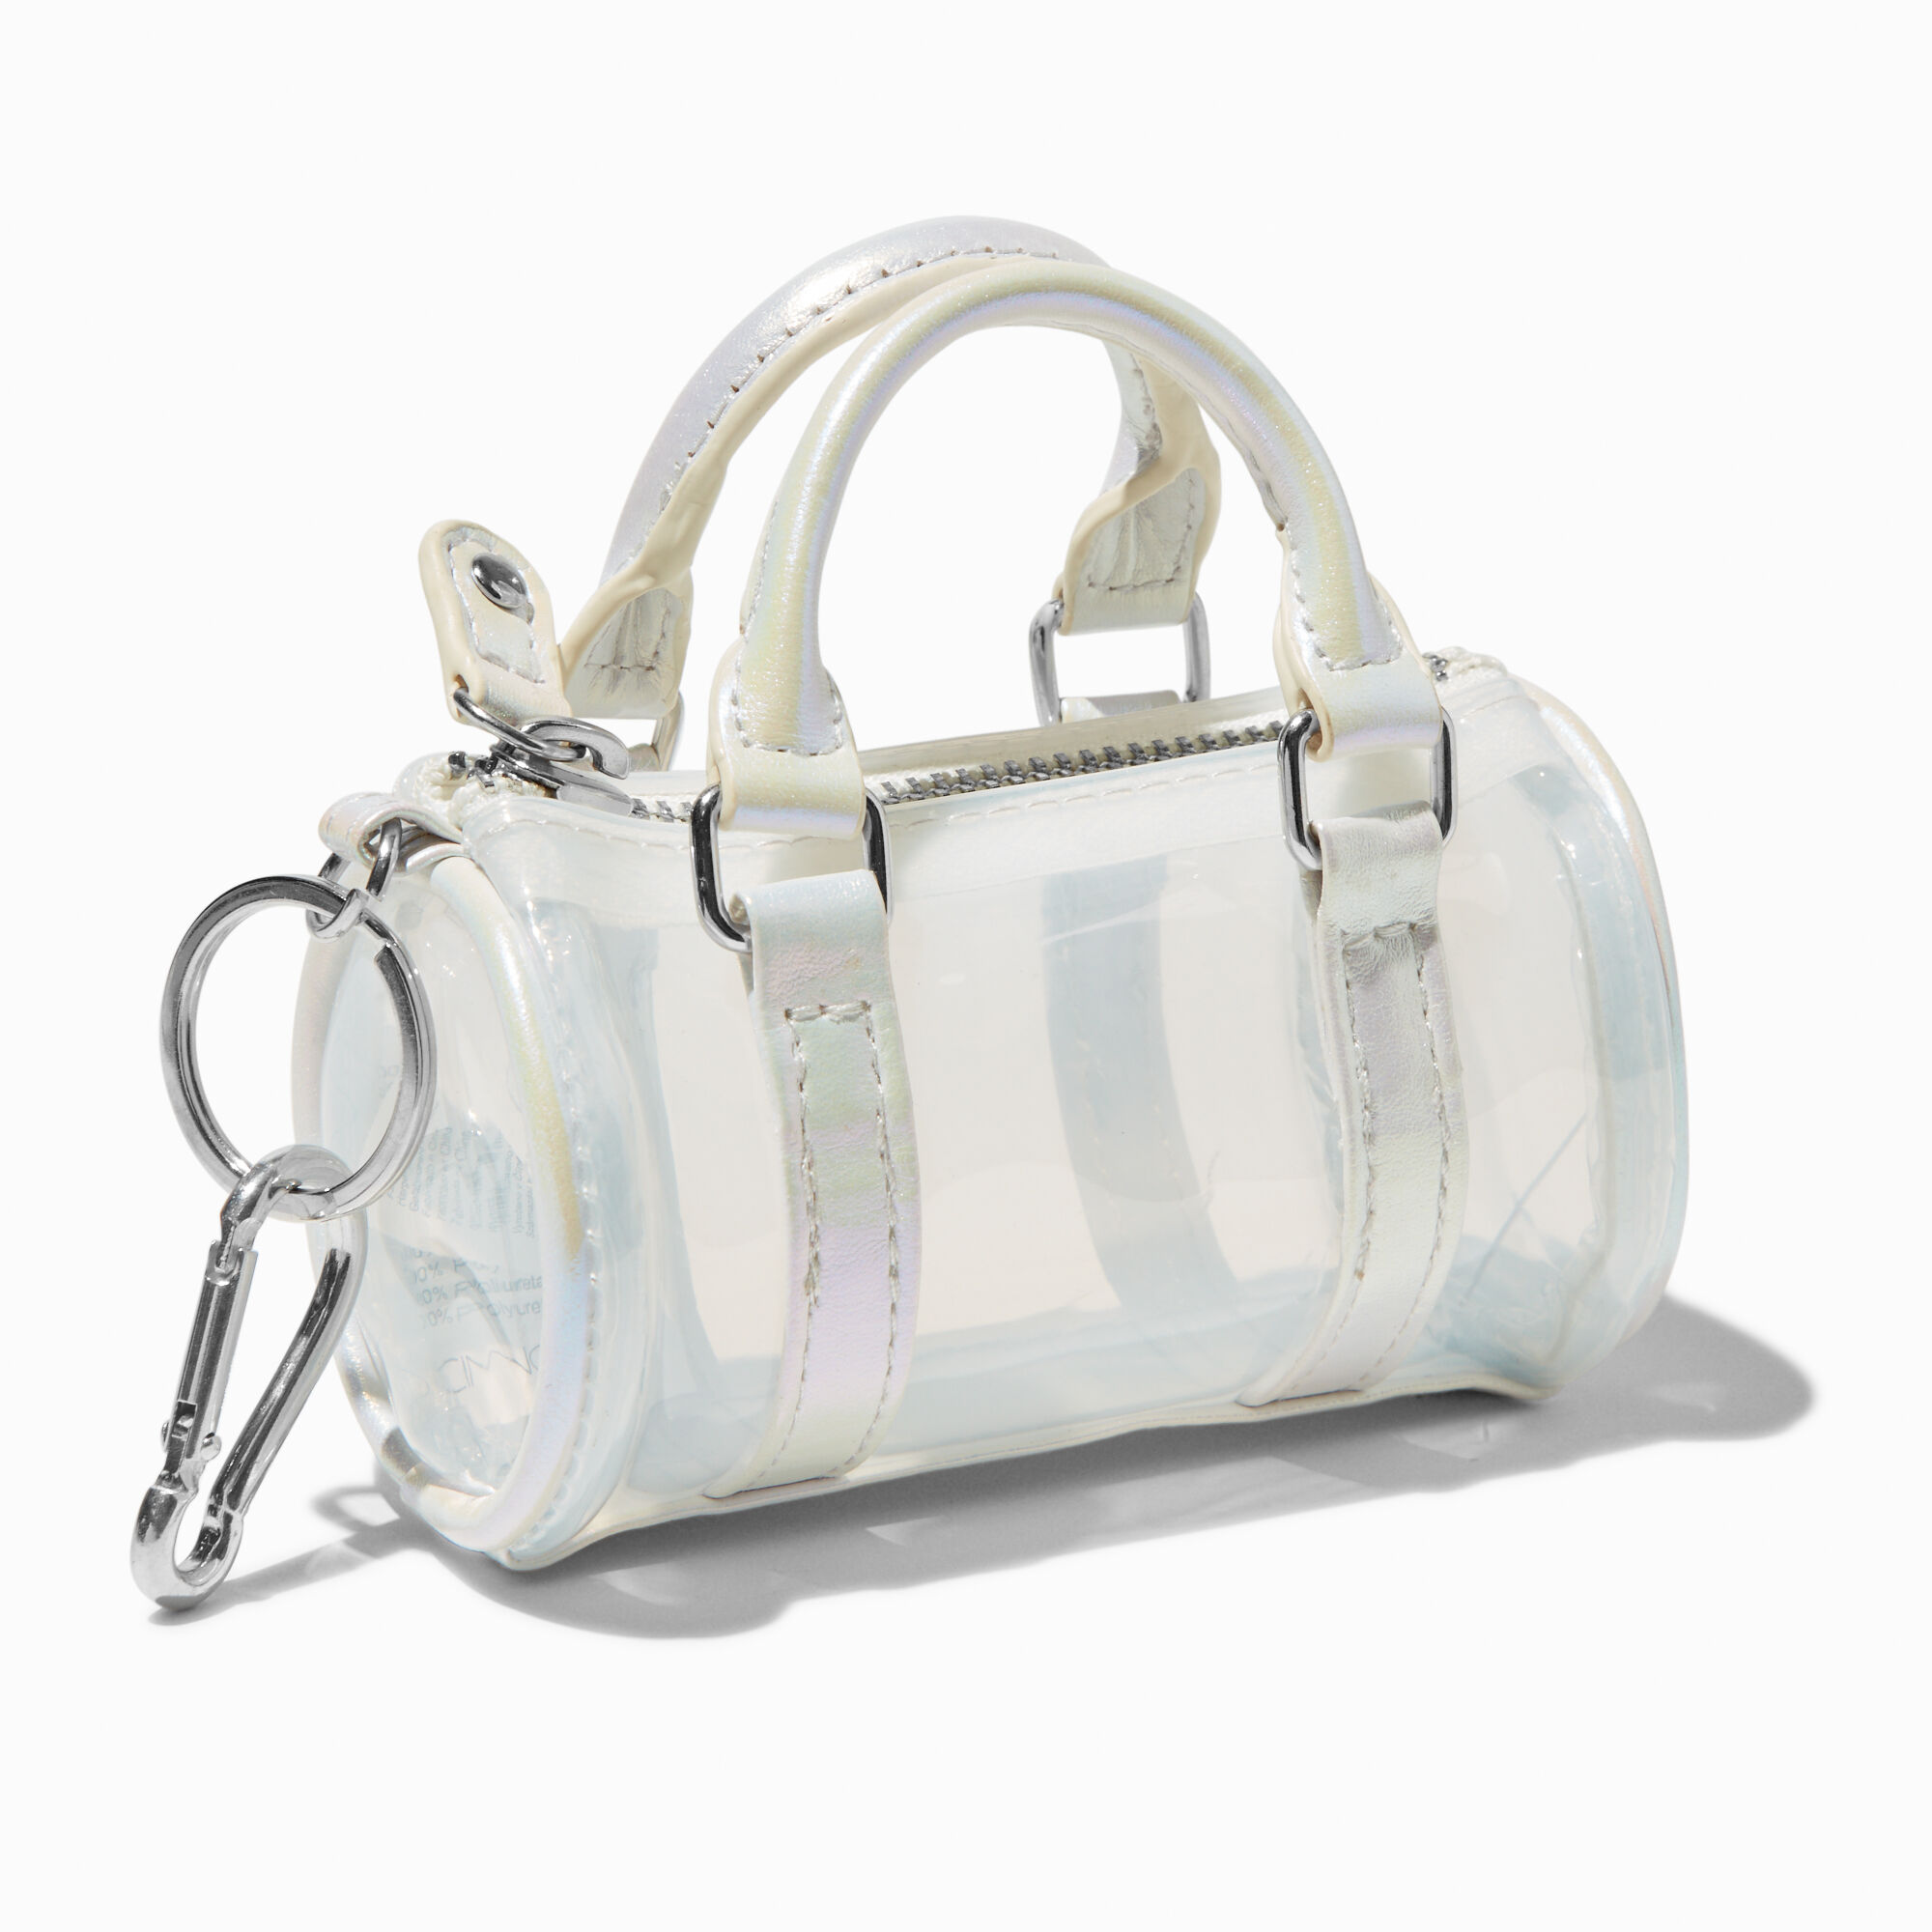 View Claires Clear Mini Barrel Purse Keyring information